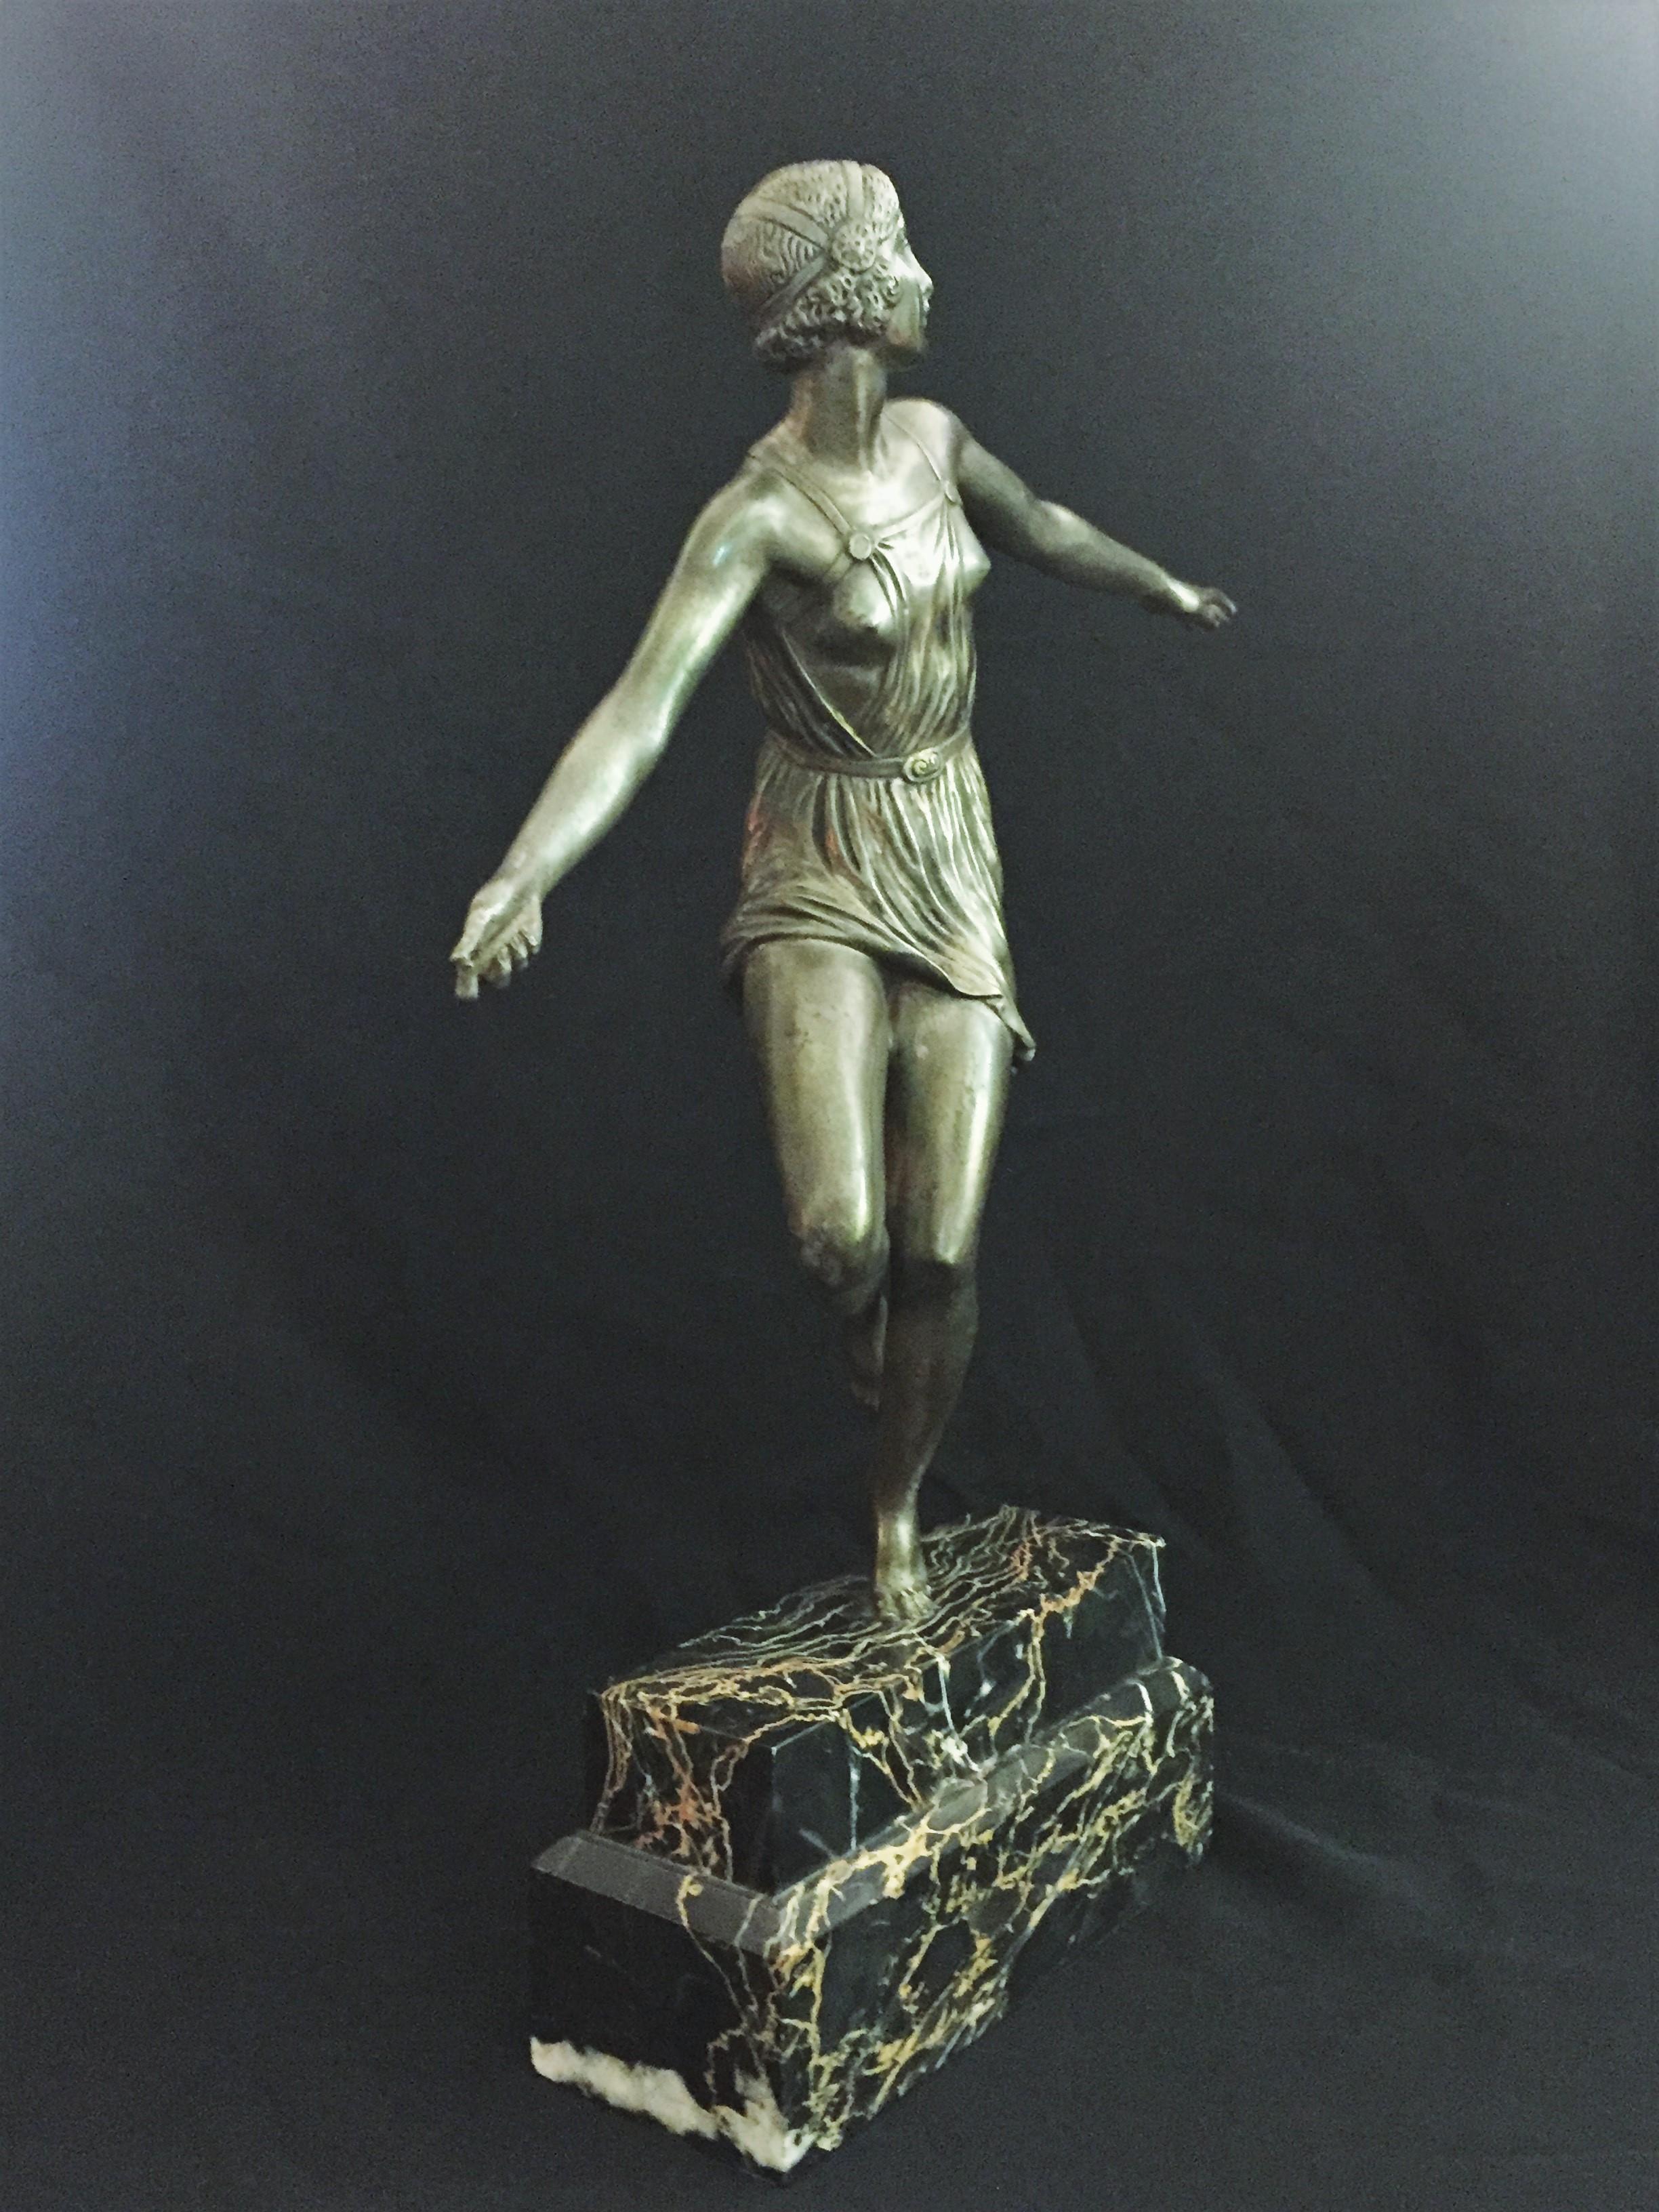 Lovely large French silvered bronze sculpture of a semi-nude erotic dancer, signed in the bronze: Josselin.

Original portorro marble base. 

Dimensions: H 15.25”, W 11.5”, D 2.75”.
 